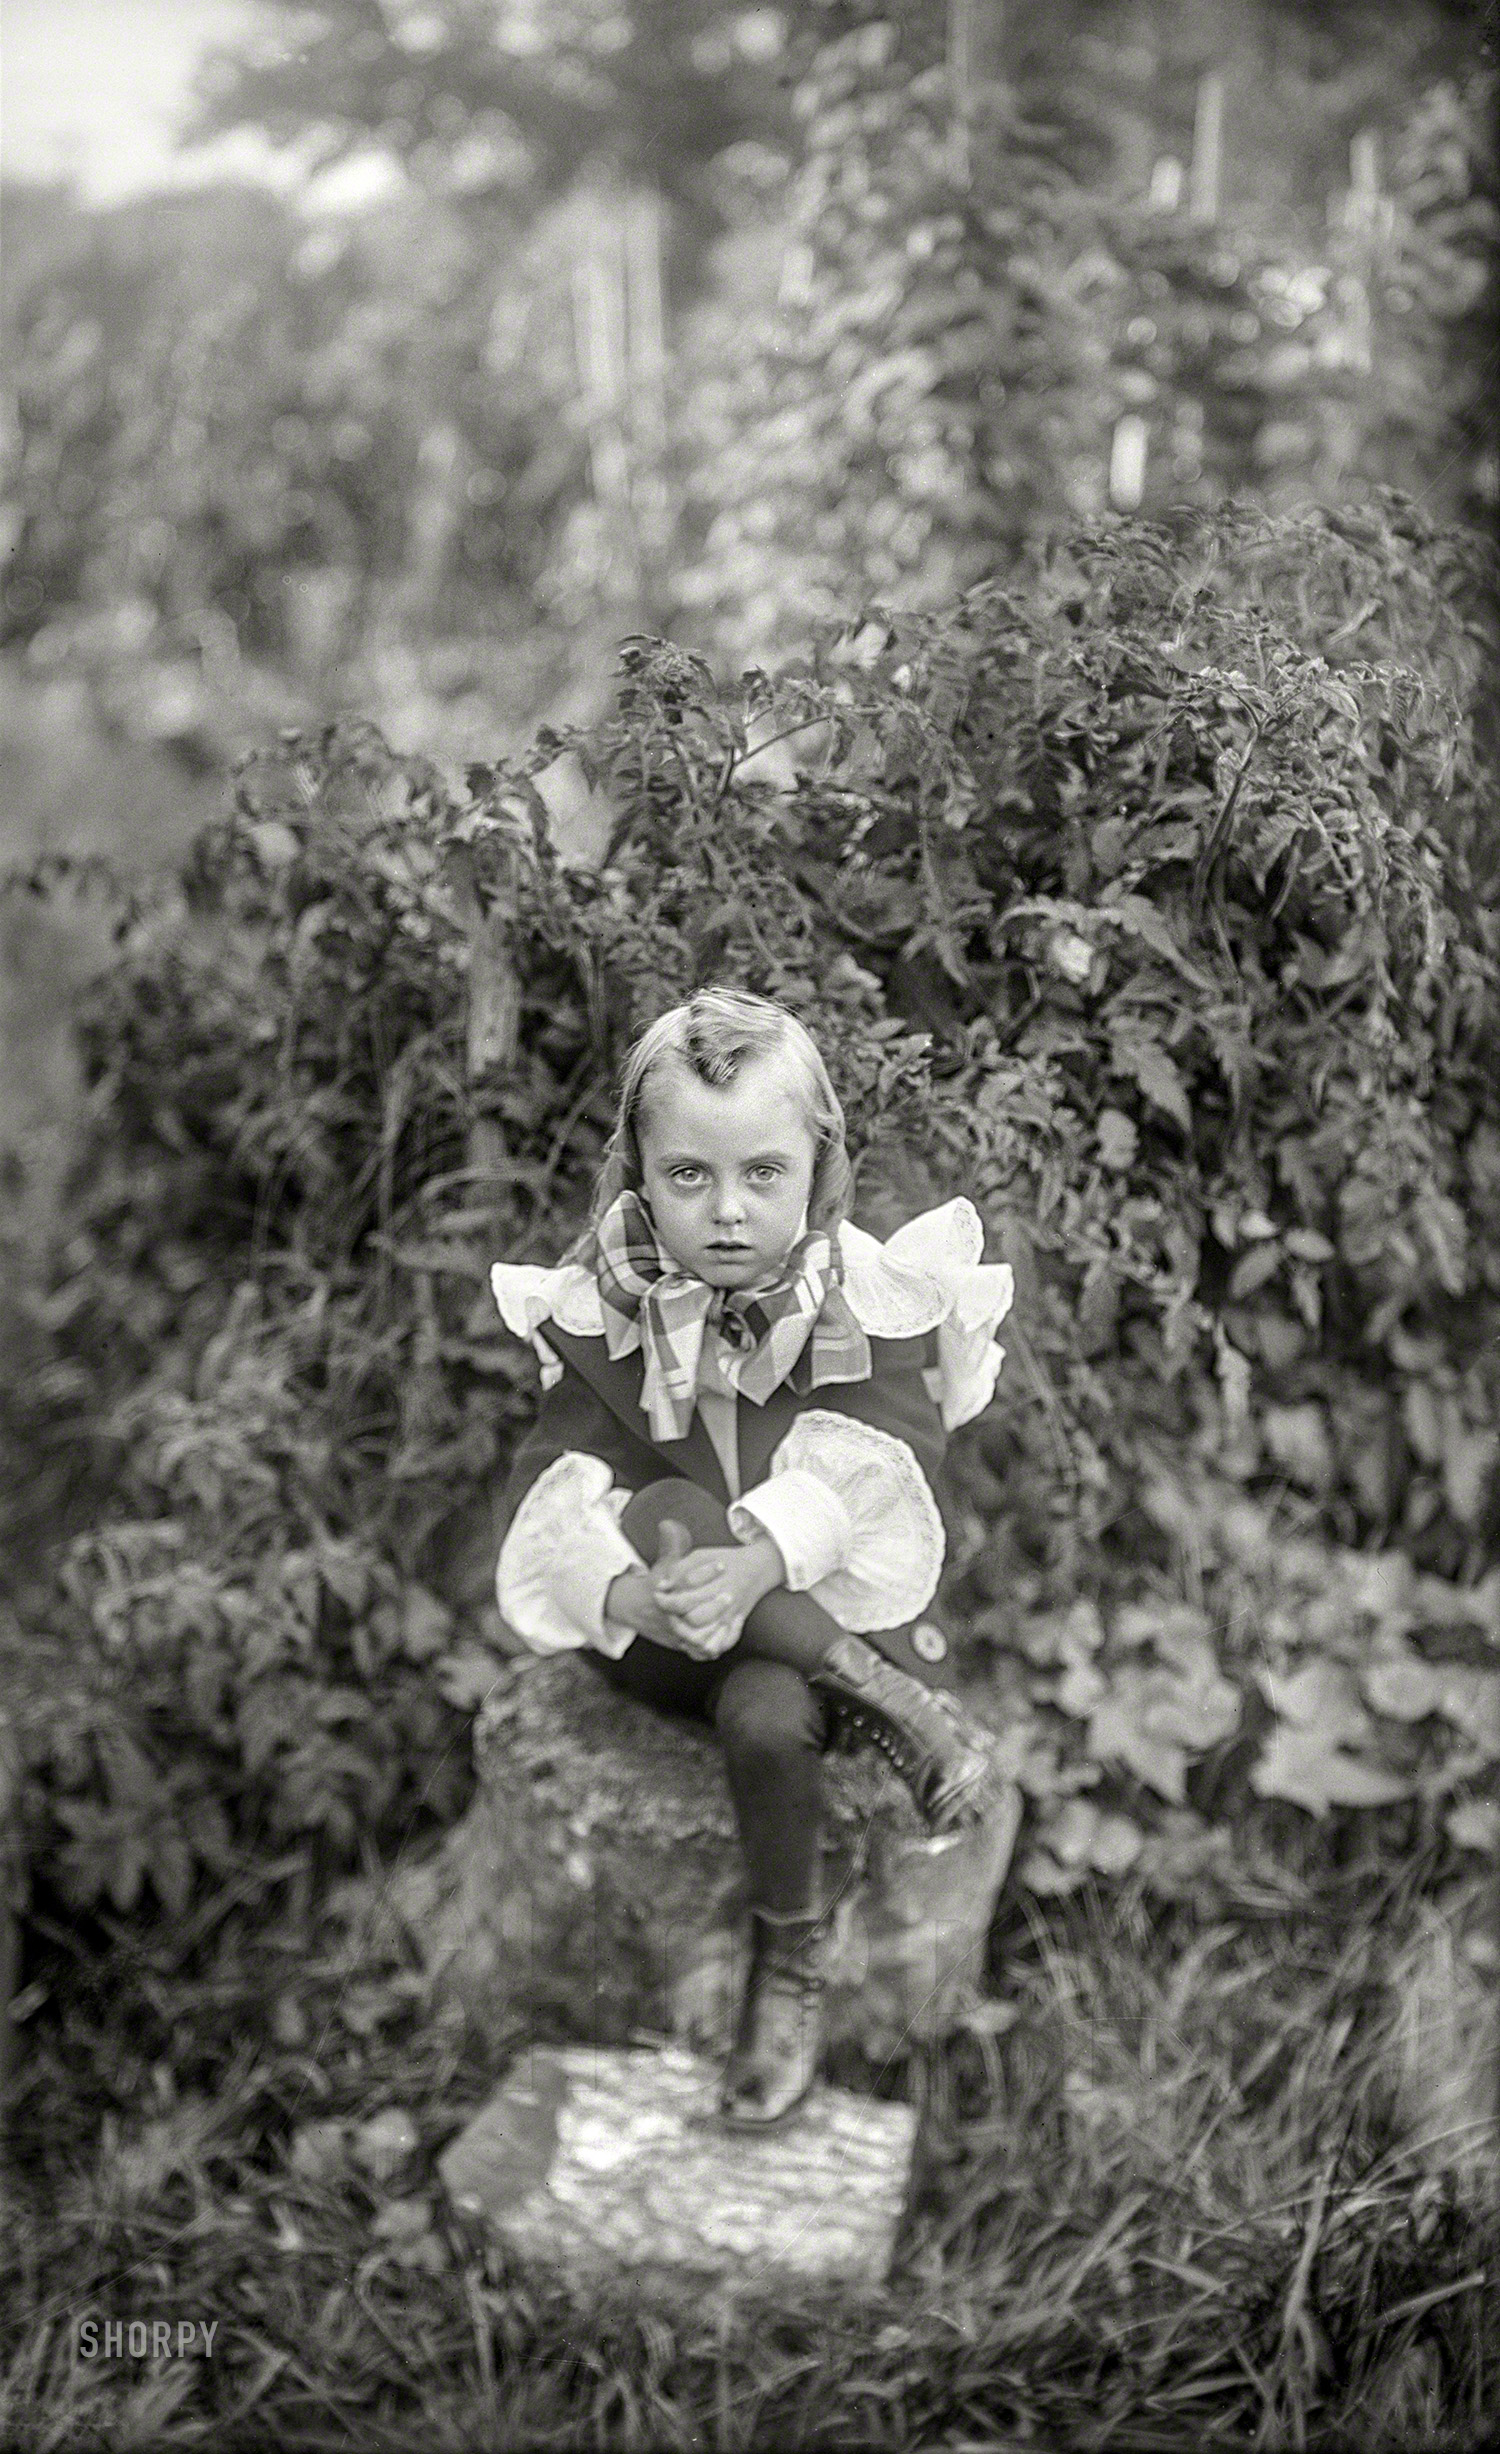 A New England garden circa 1900 and yet another outlandishly attired tyke, a century or so early for the "Harry Potter" casting call. View full size.